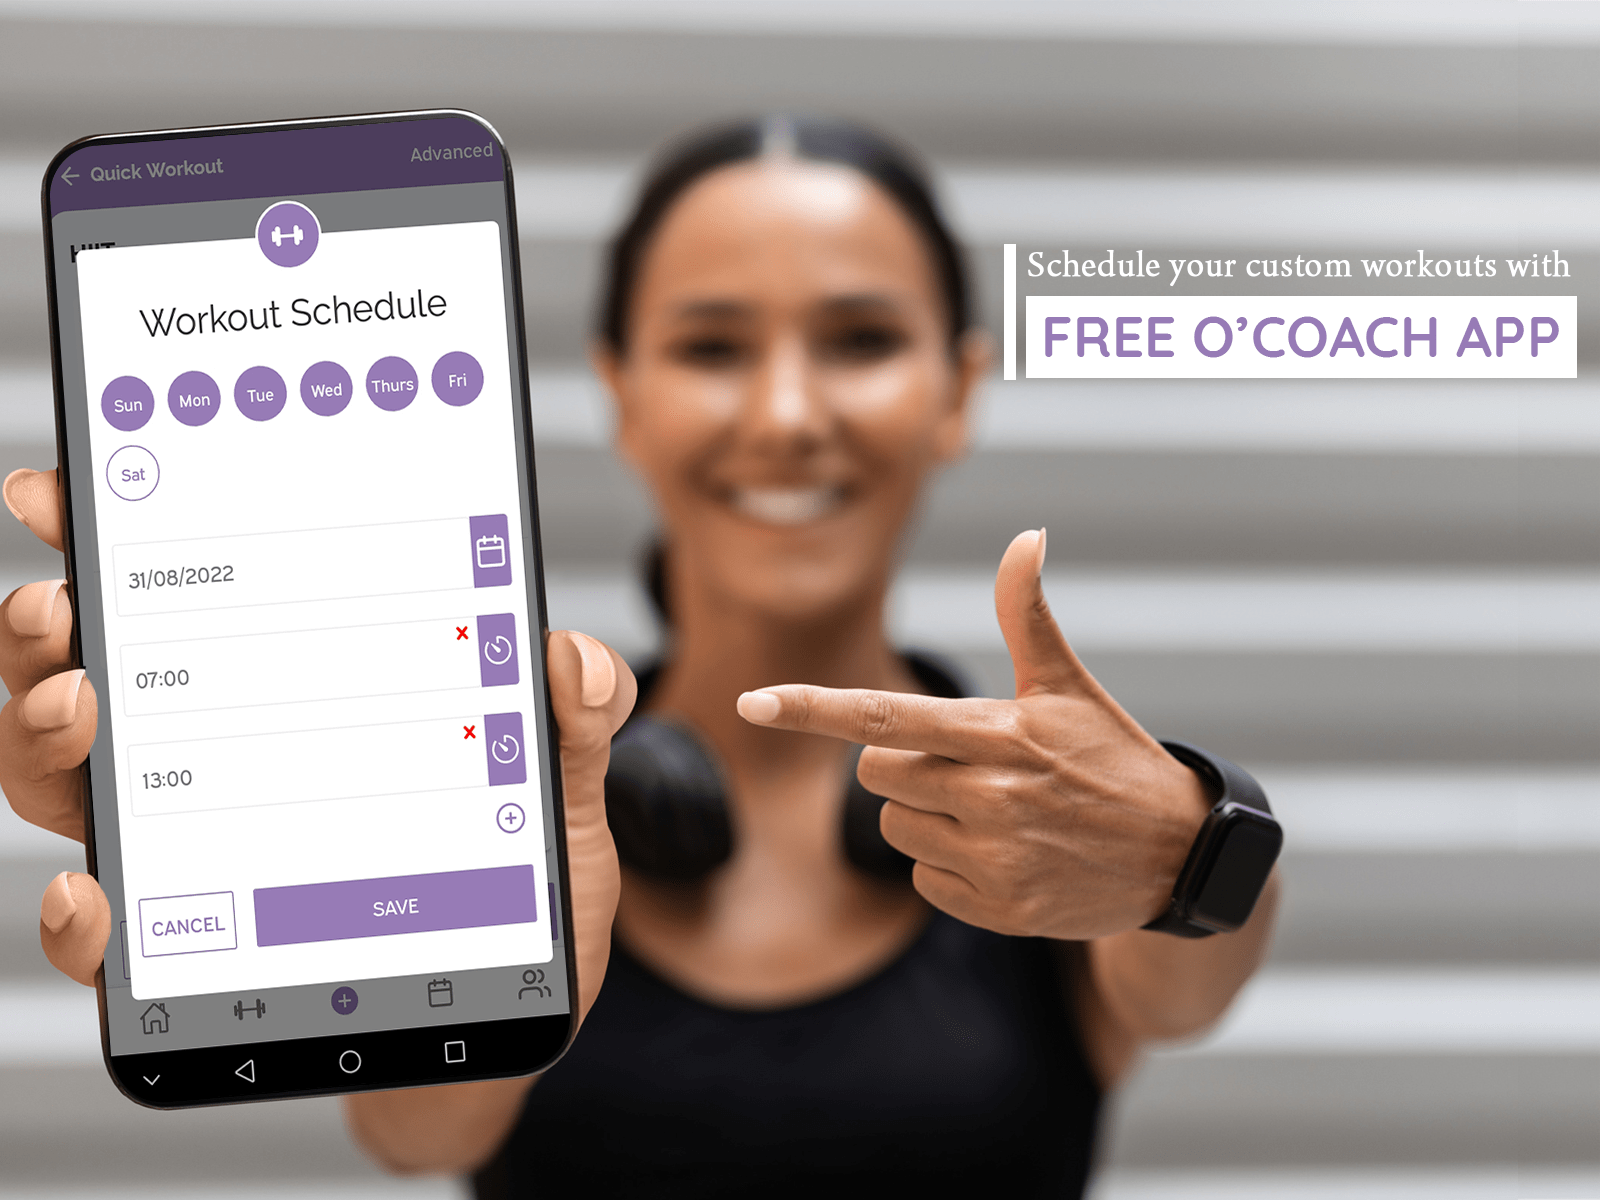 Schedule custom workout with O'Coach custom workout app